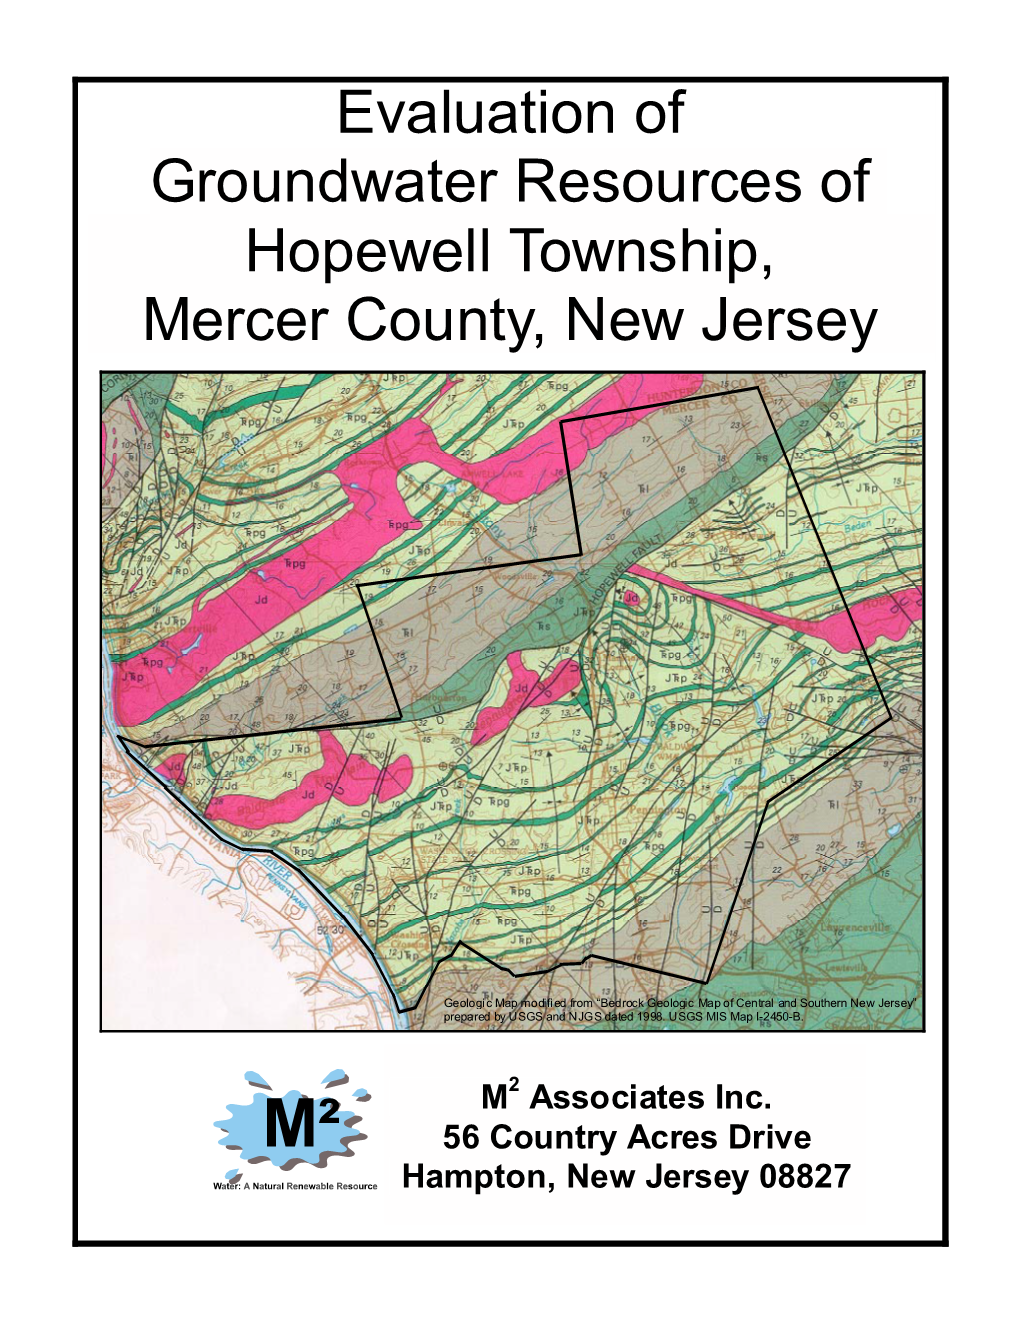 Evaluation of Groundwater Resources of Hopewell Township, Mercer County, New Jersey